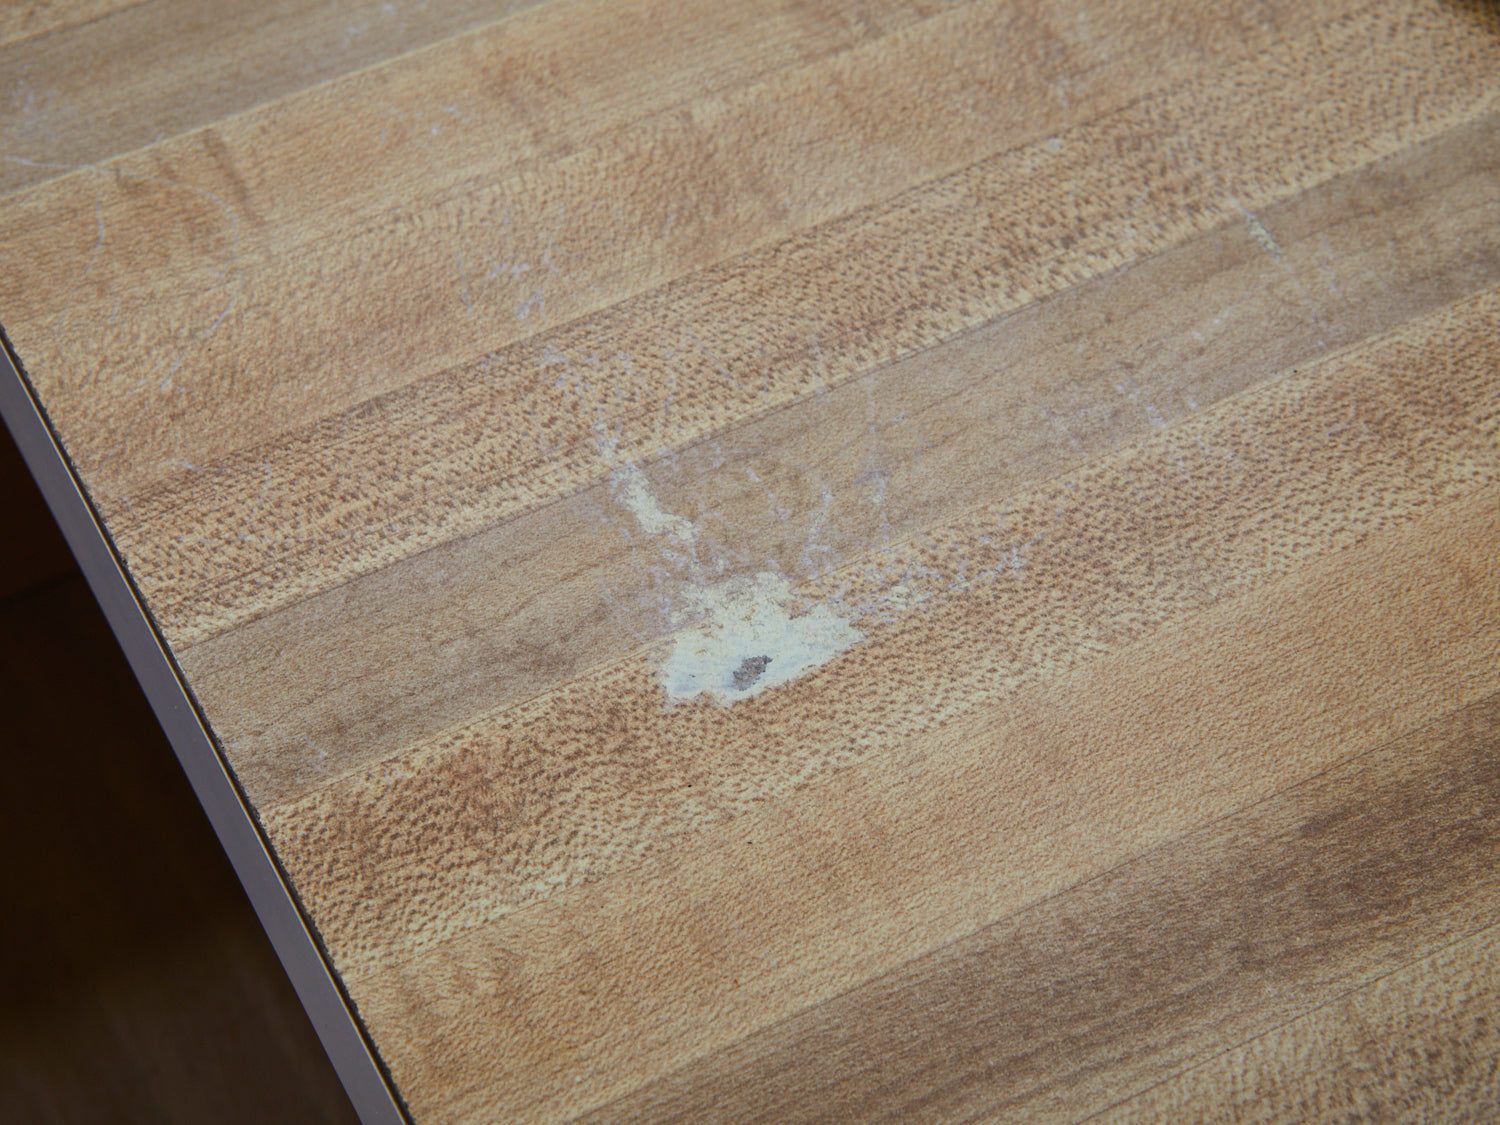 Close up of damage to faux wood formica